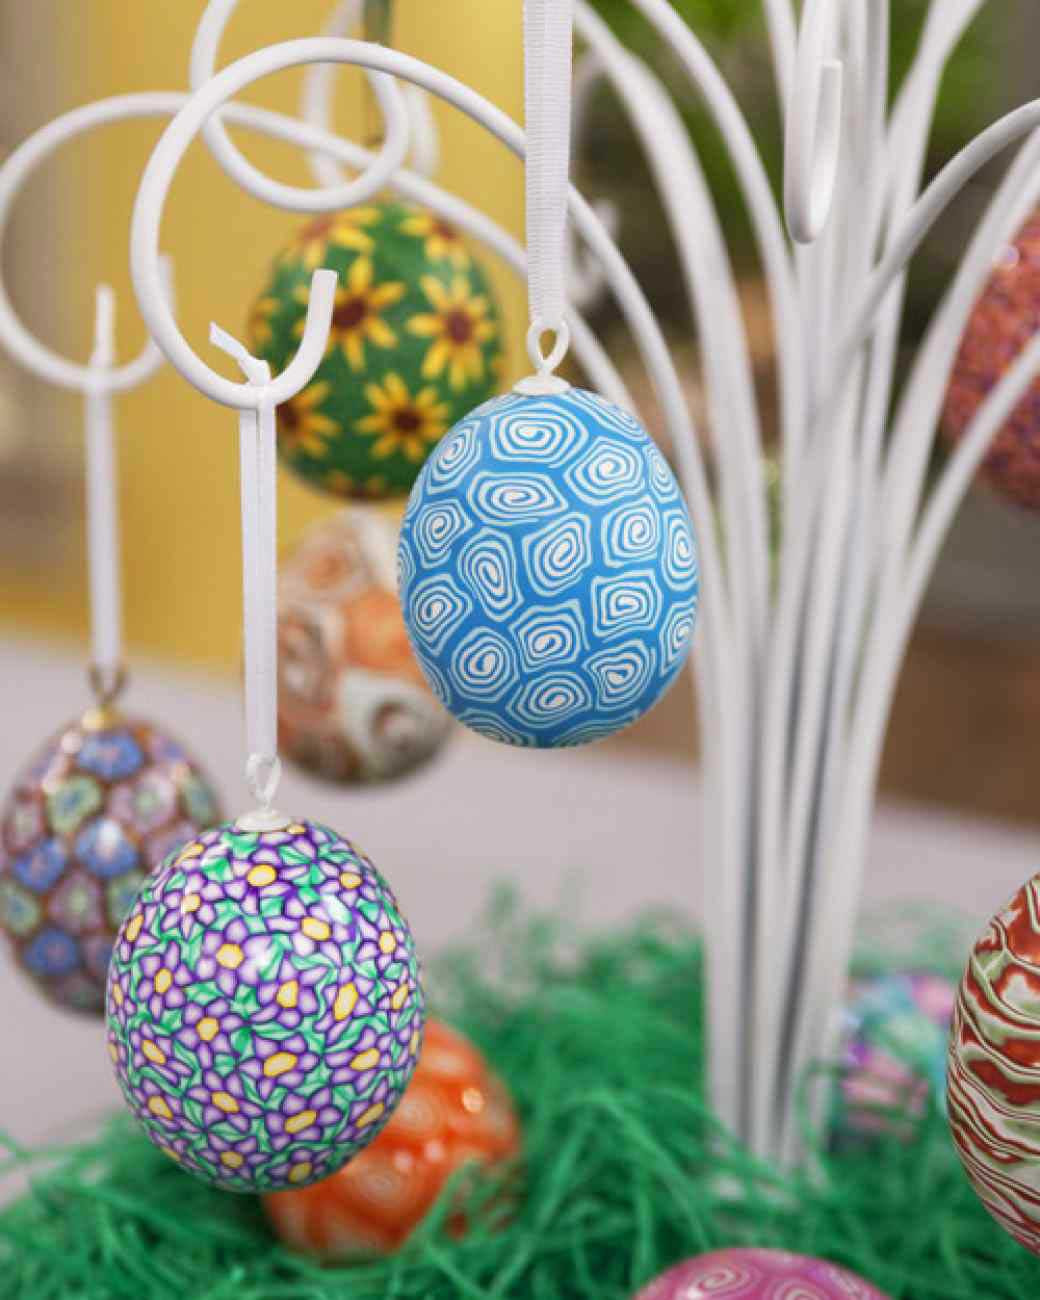 Diy Easter Eggs
 The 32 Most Unique and Fun DIY Easter Eggs Tutorials